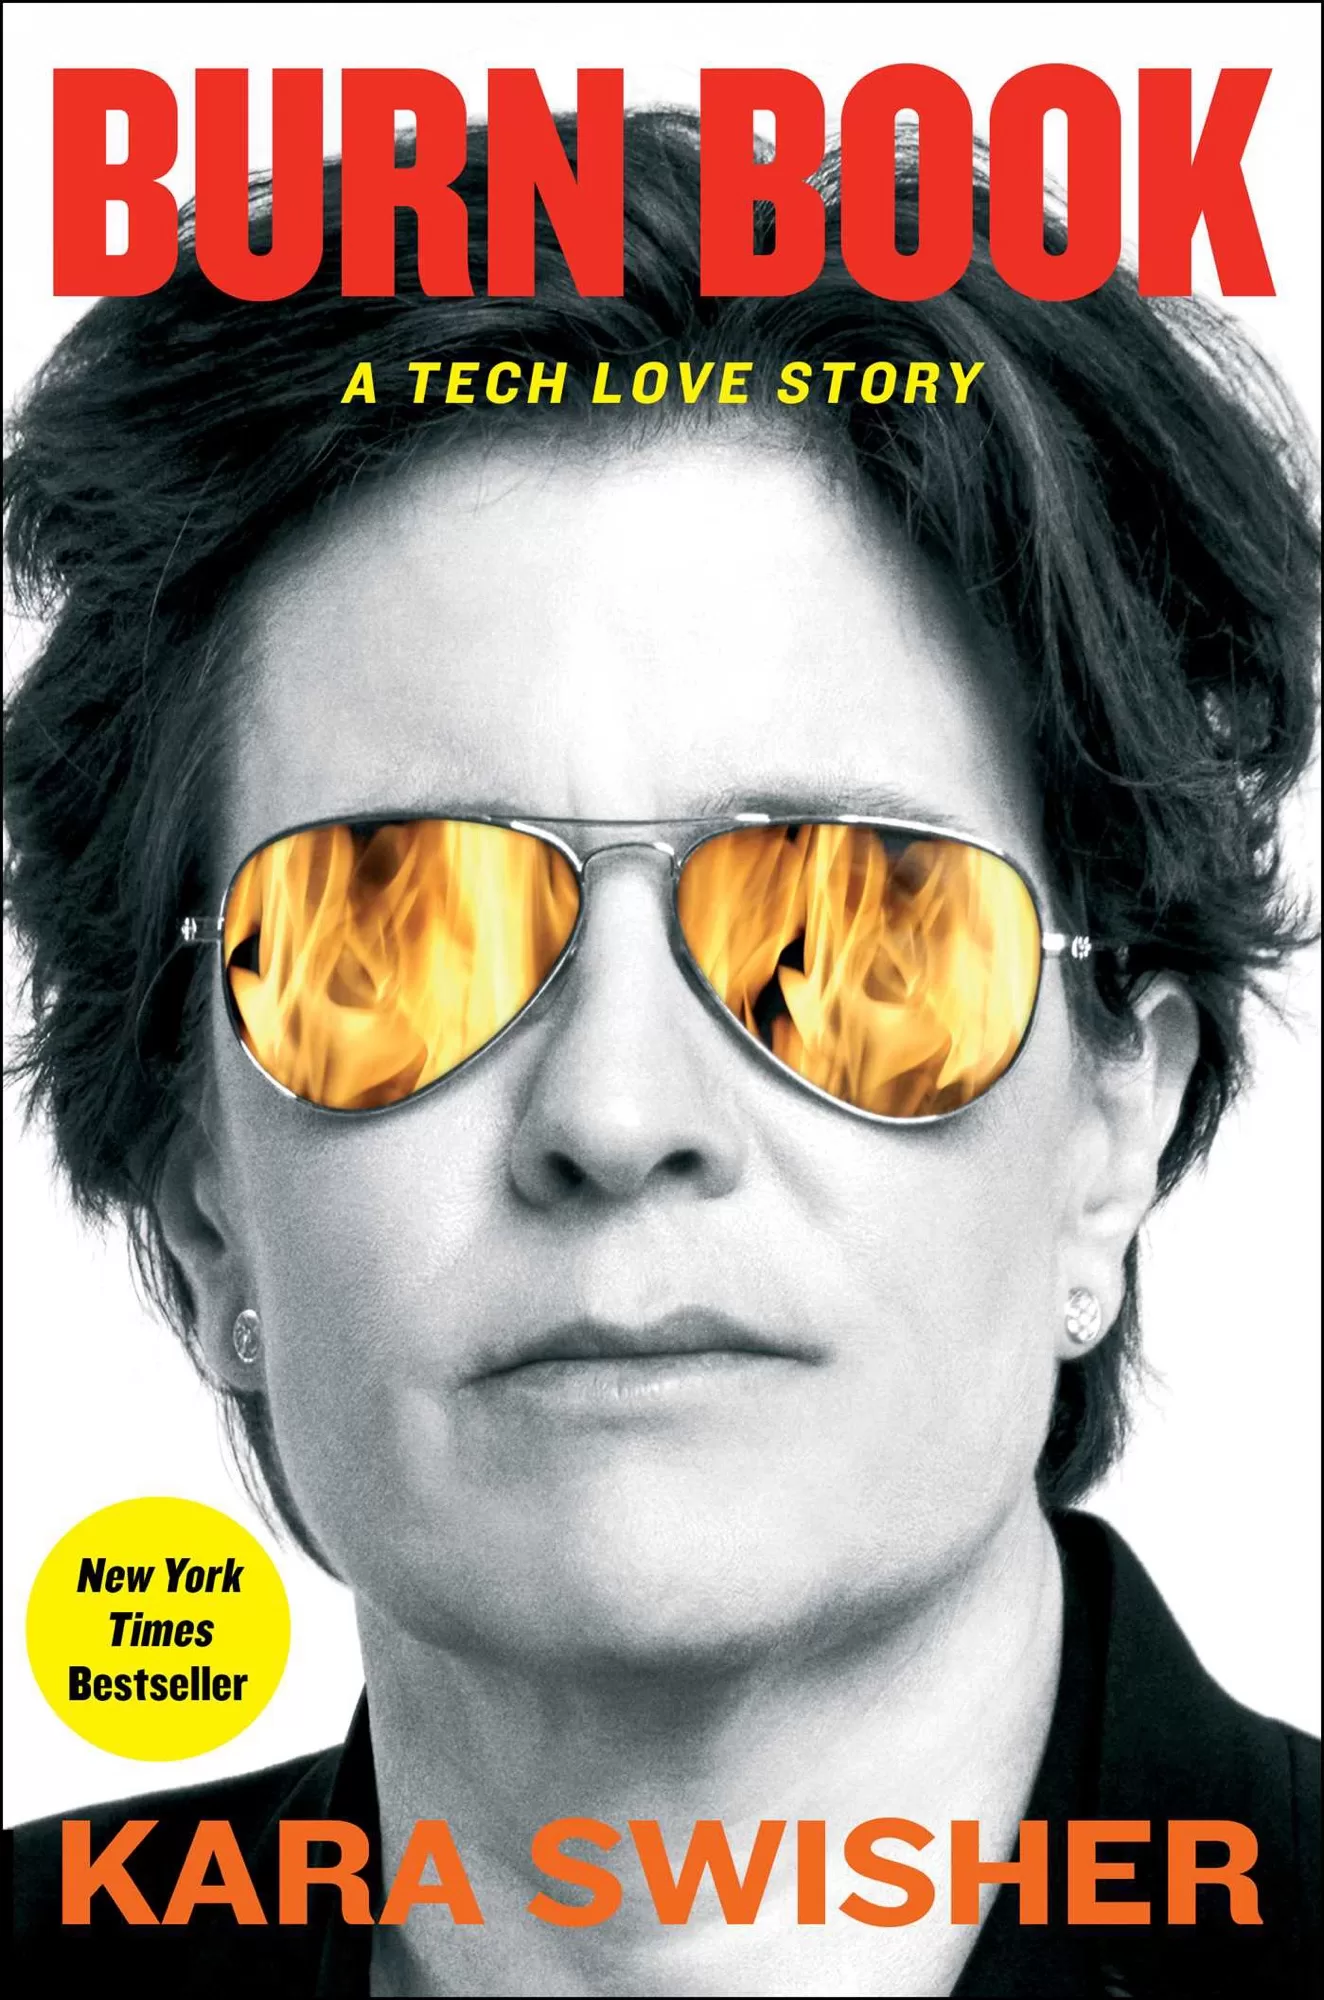 BURN BOOK A TECH LOVE STORY New York Times Bestseller KARA SWISHER (with a portrait of Kara, flames reflecting in her mirrored sunglasses)